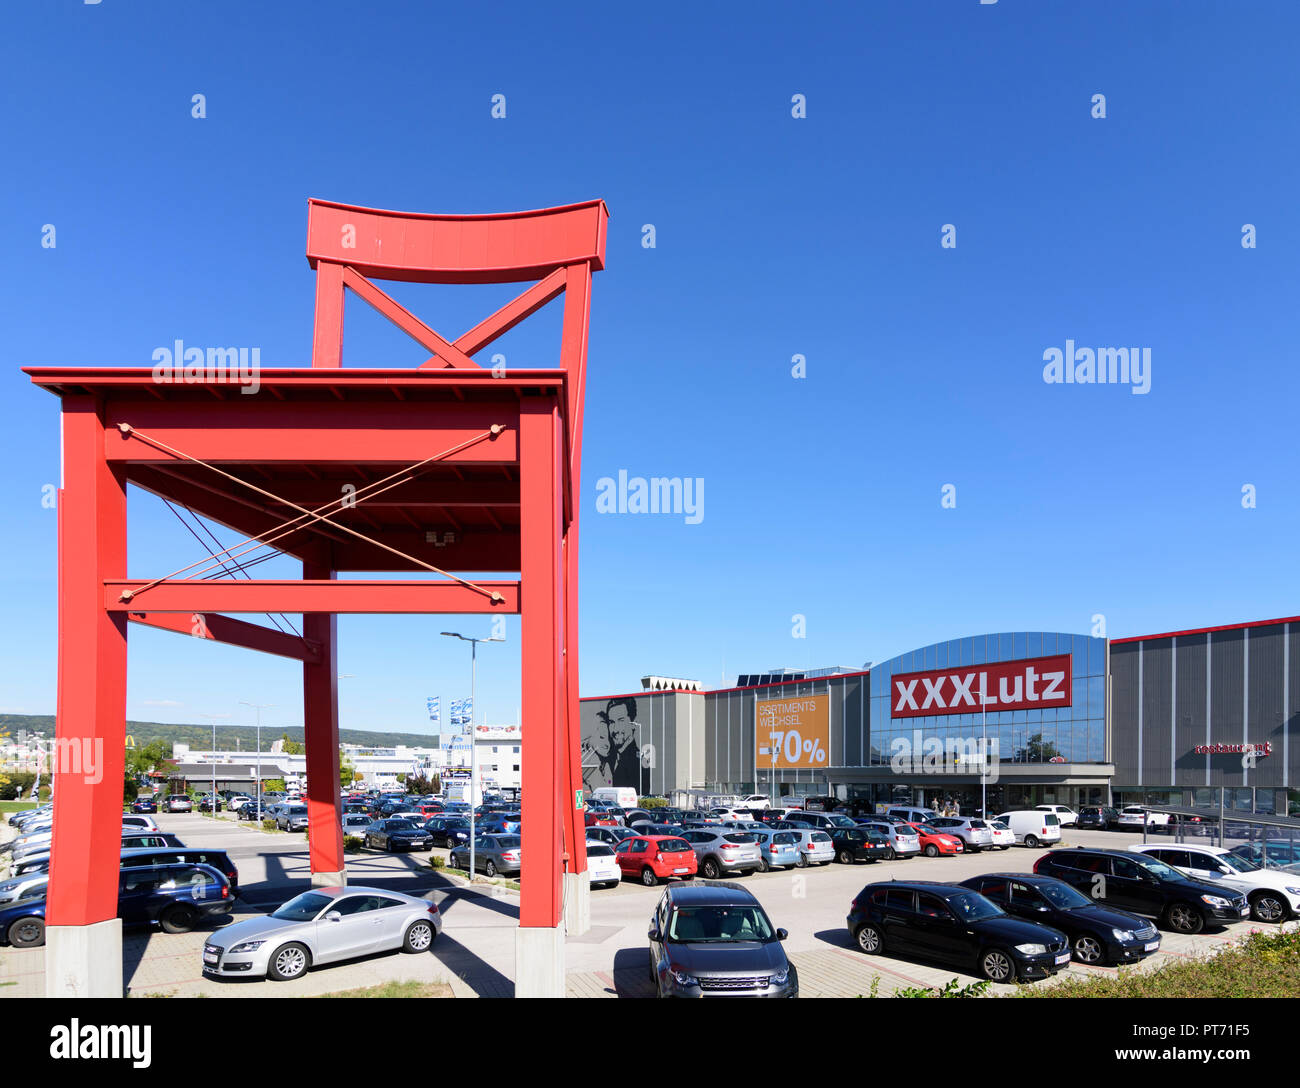 Page 5 - Furniture Shop High Resolution Stock Photography and Images - Alamy